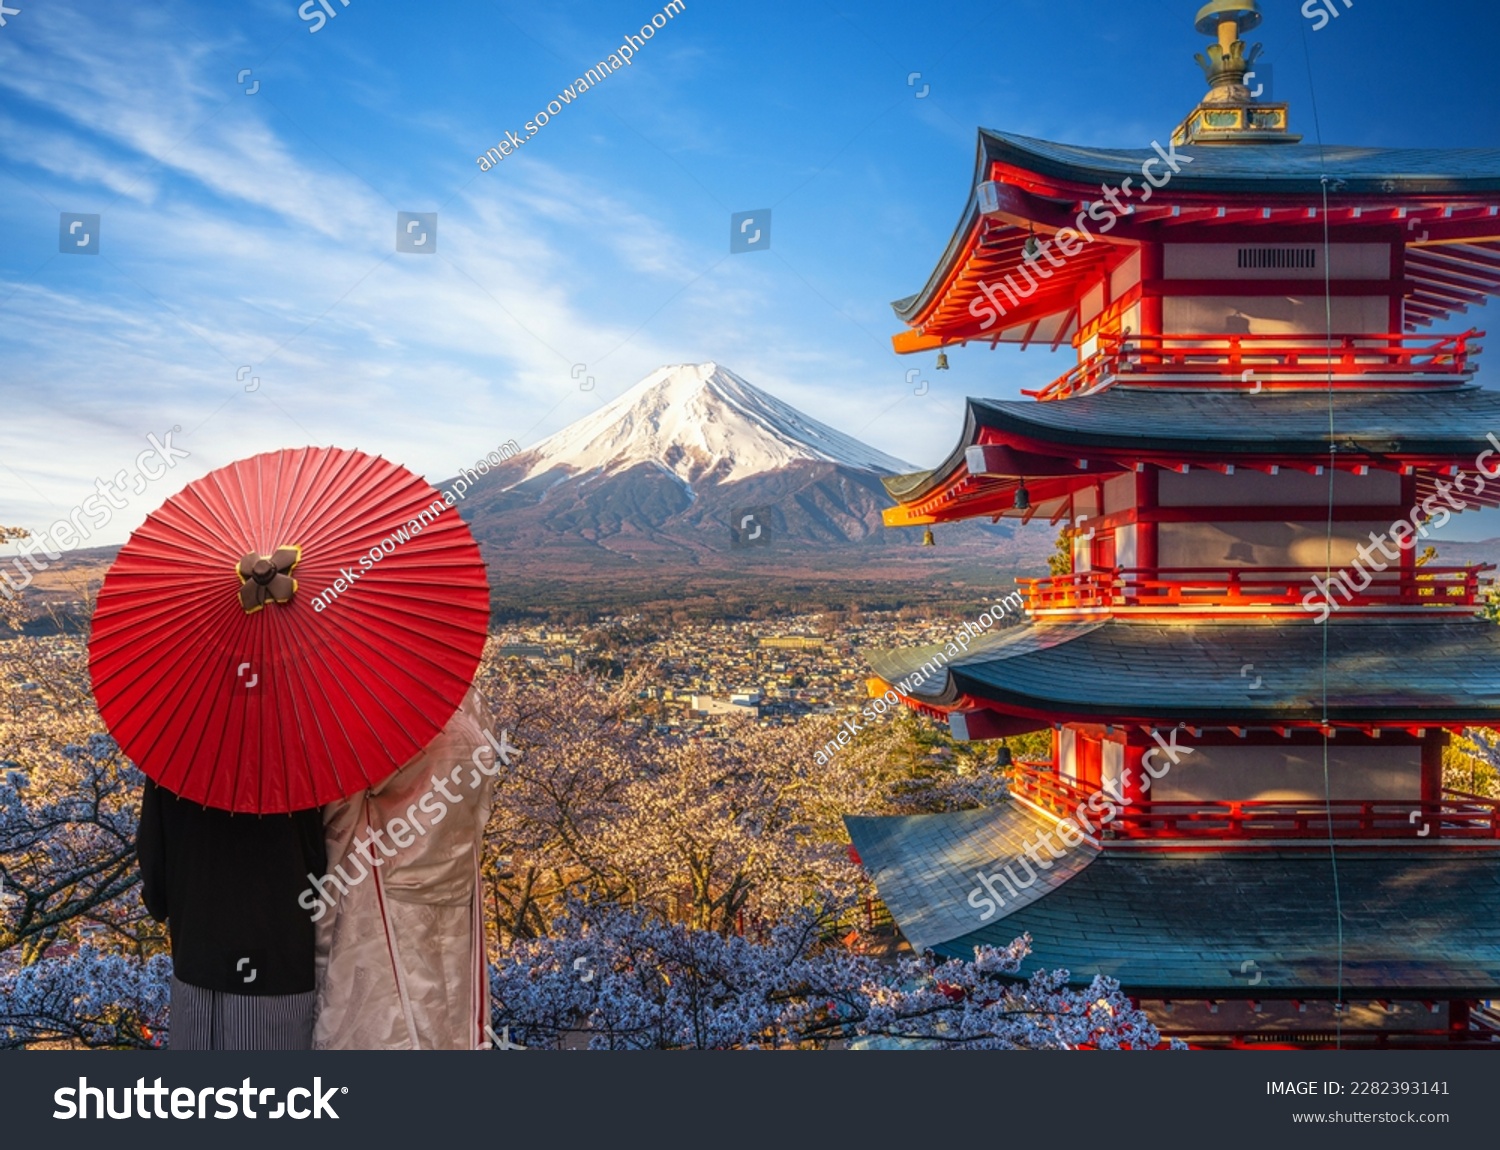 Red chureito pagoda with cherry blossom and Fujiyama mountain on the day and morning sunrise time in Tokyo city, Japan #2282393141